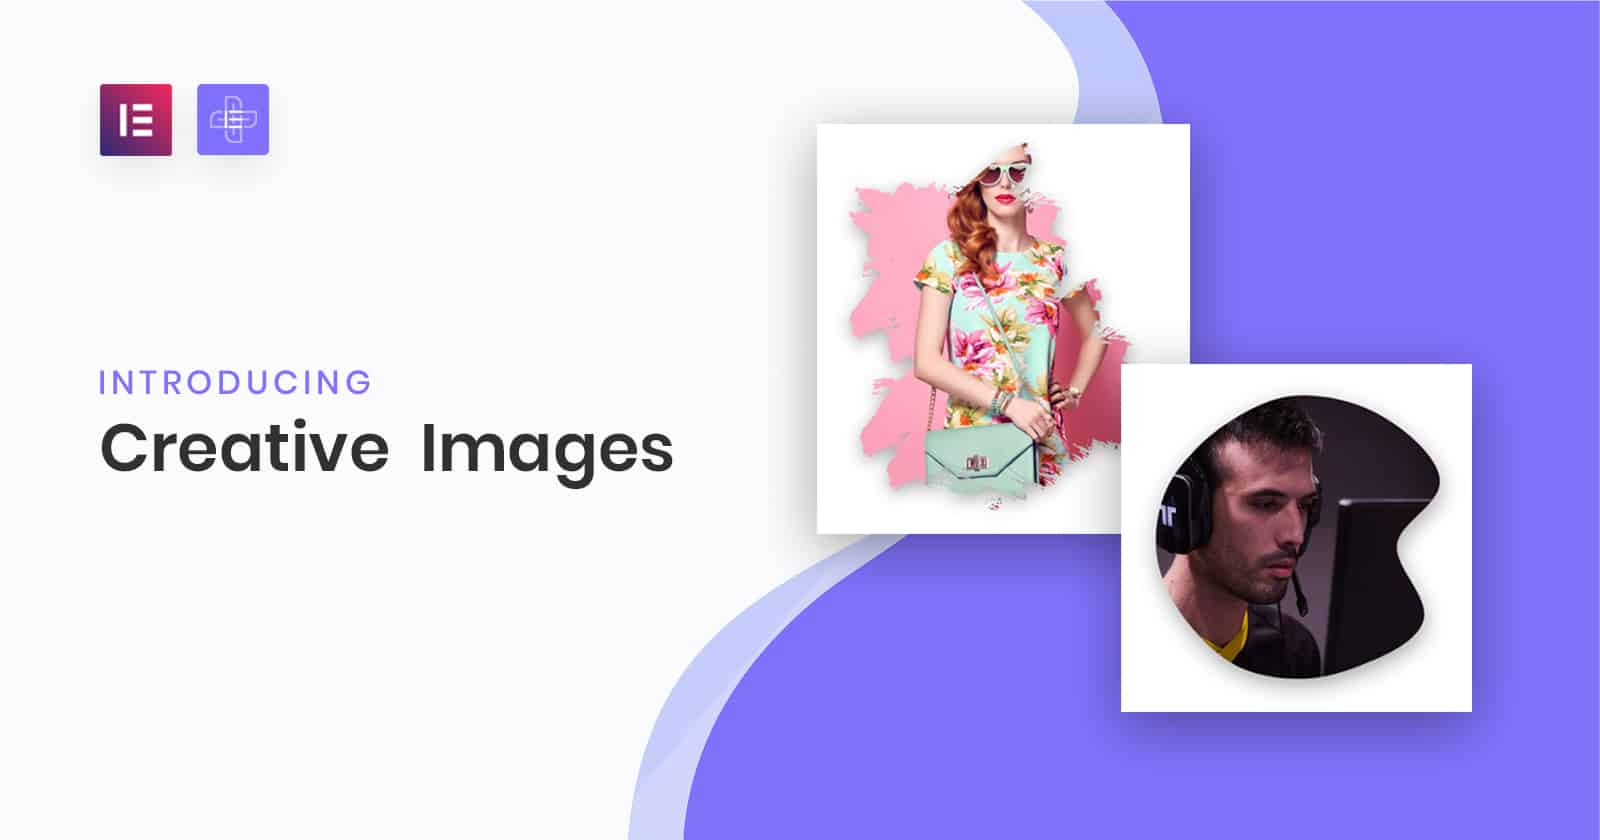 Creative Images Widgets for elementor | The Plus Addons for ElementorCreative Images Widgets for elementor | The Plus Addons for Elementor***********************